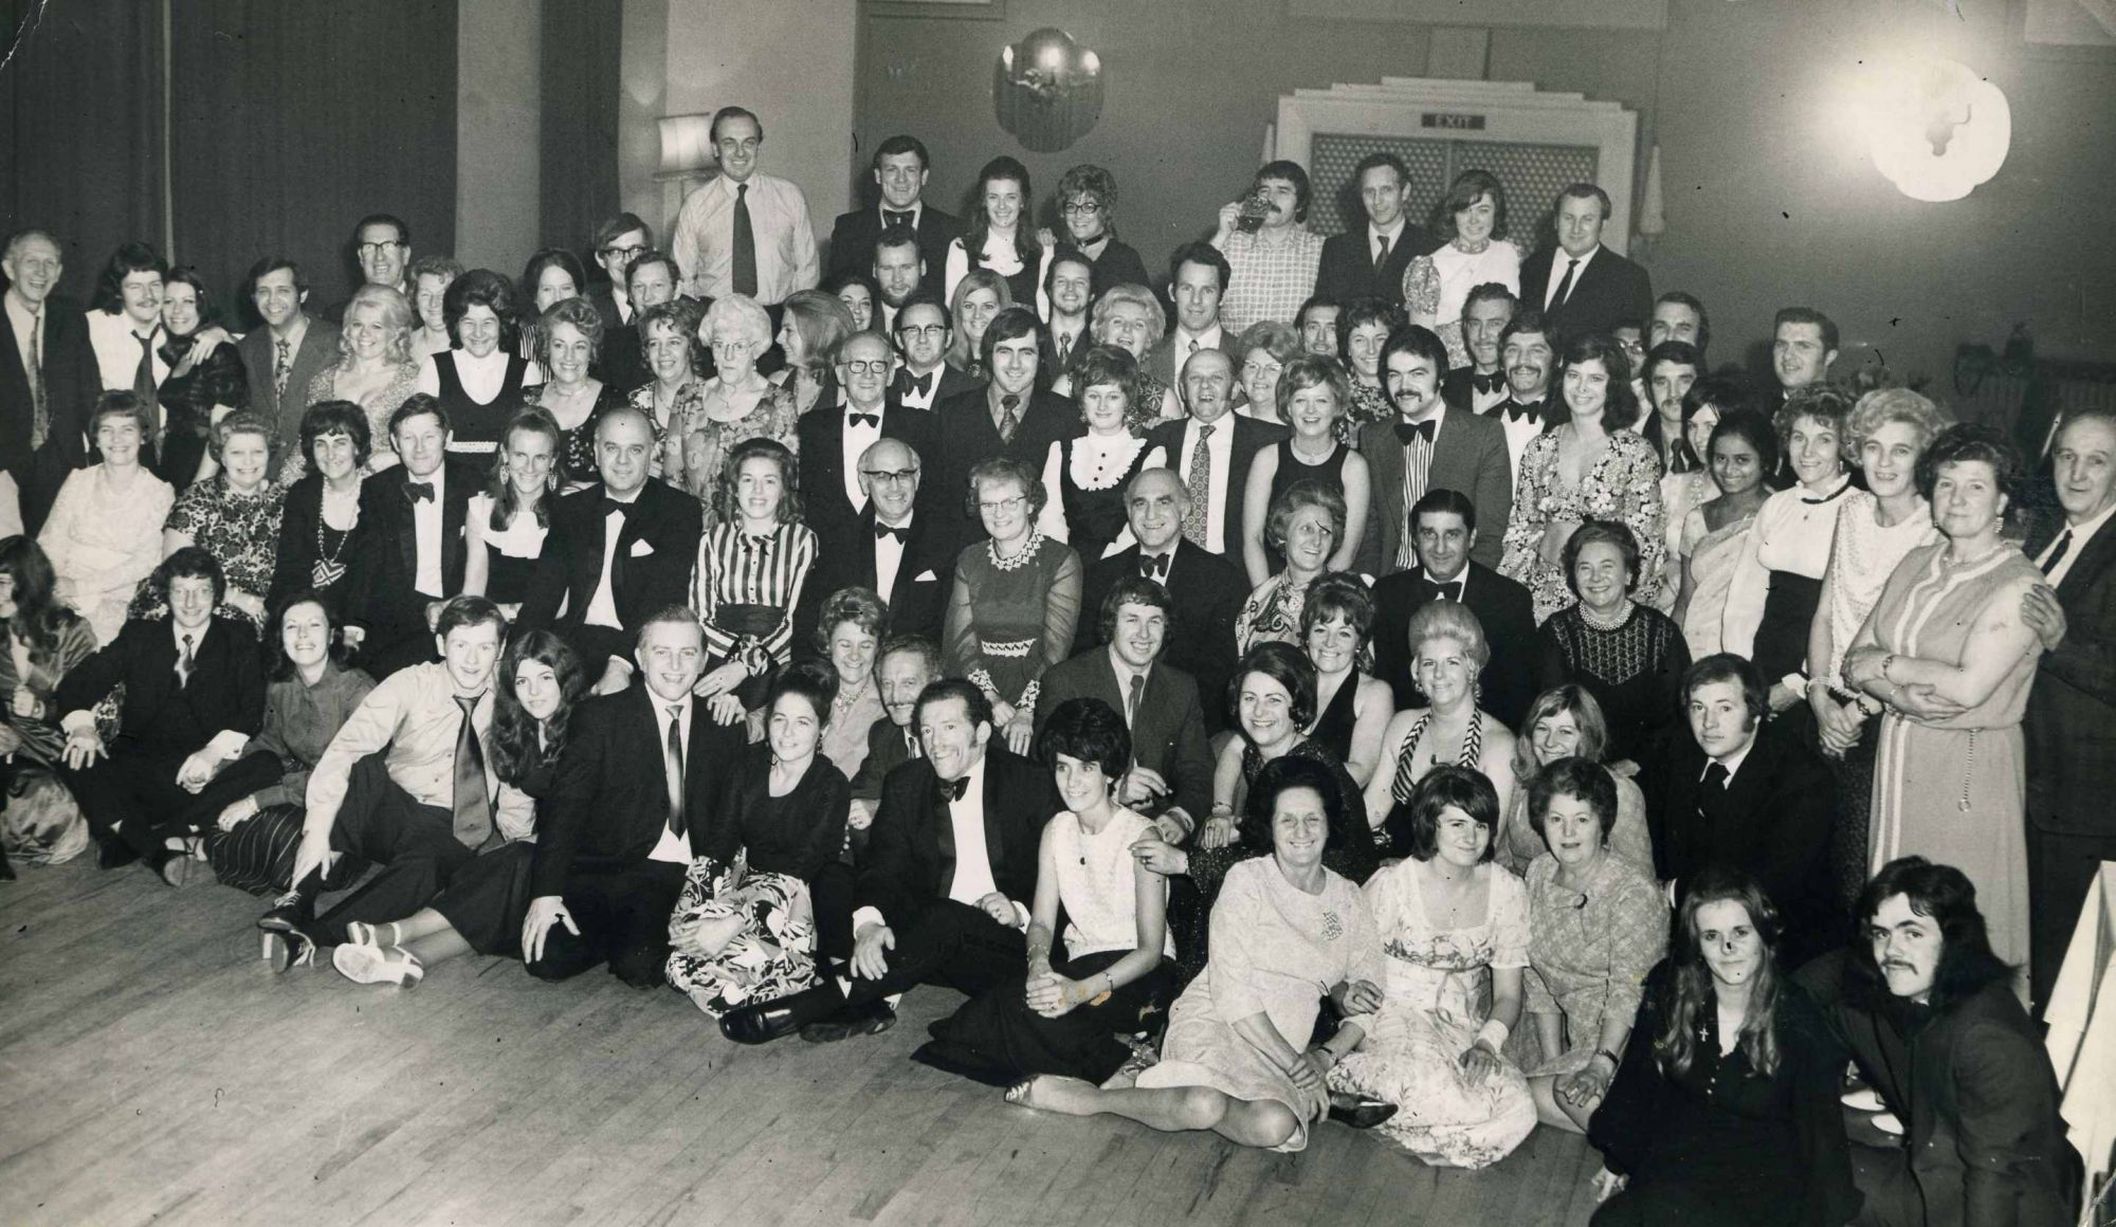 The 1972 Southport Visiter staff dance, at the Royal Clifton Hotel in Southport Photo courtesy of Nciola Kenyon